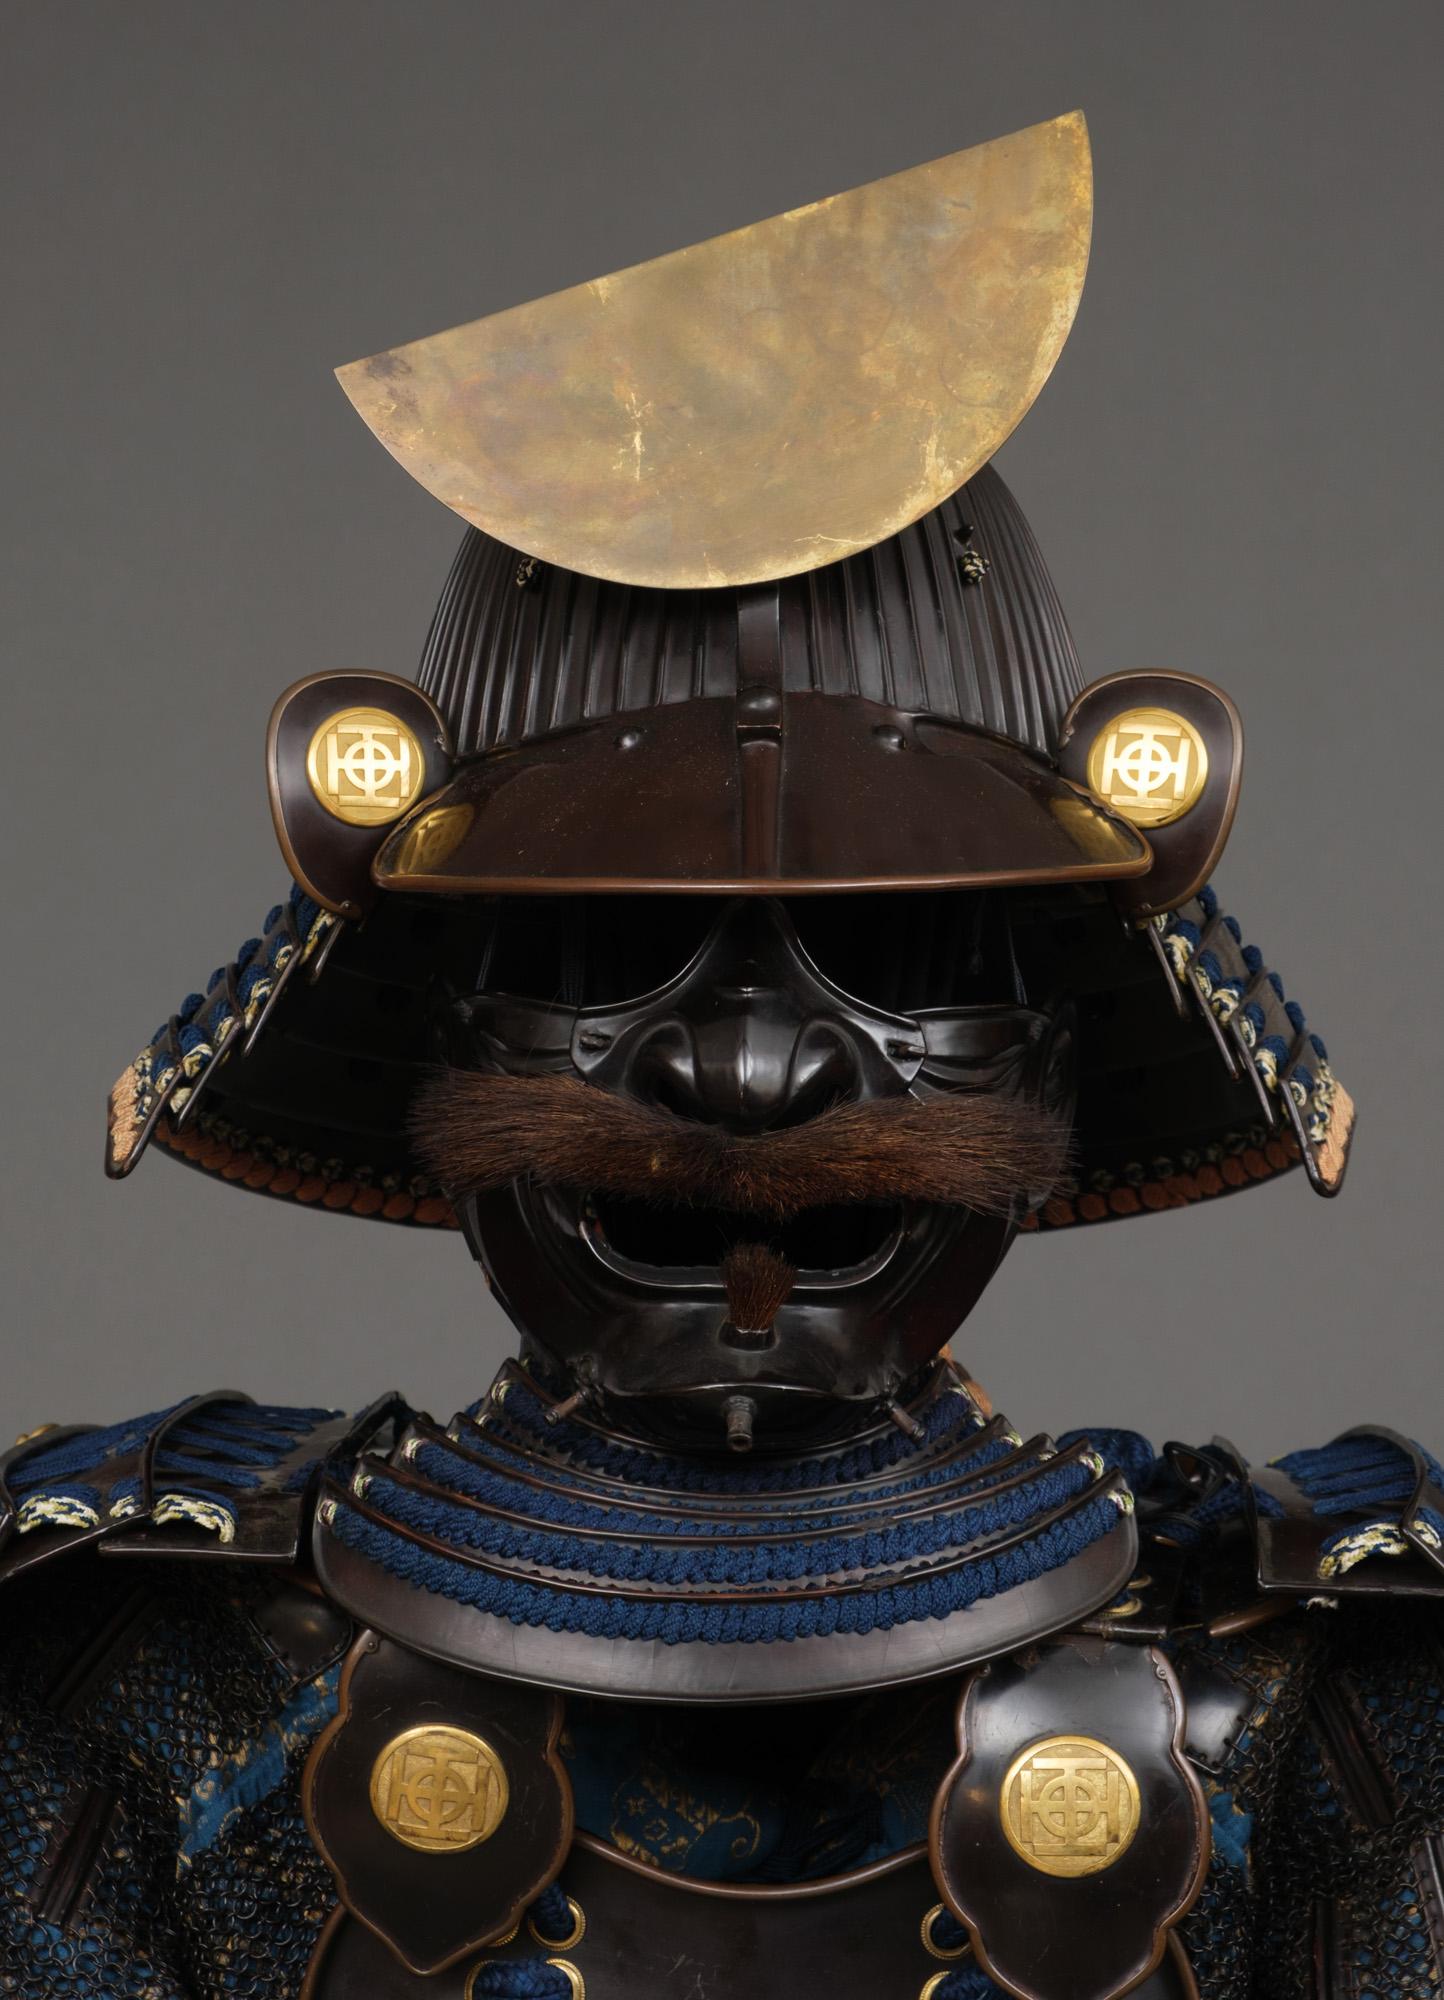 Rare set of 2 Japanese suits-of-armour, complete with 2 matching folding screens For Sale 3